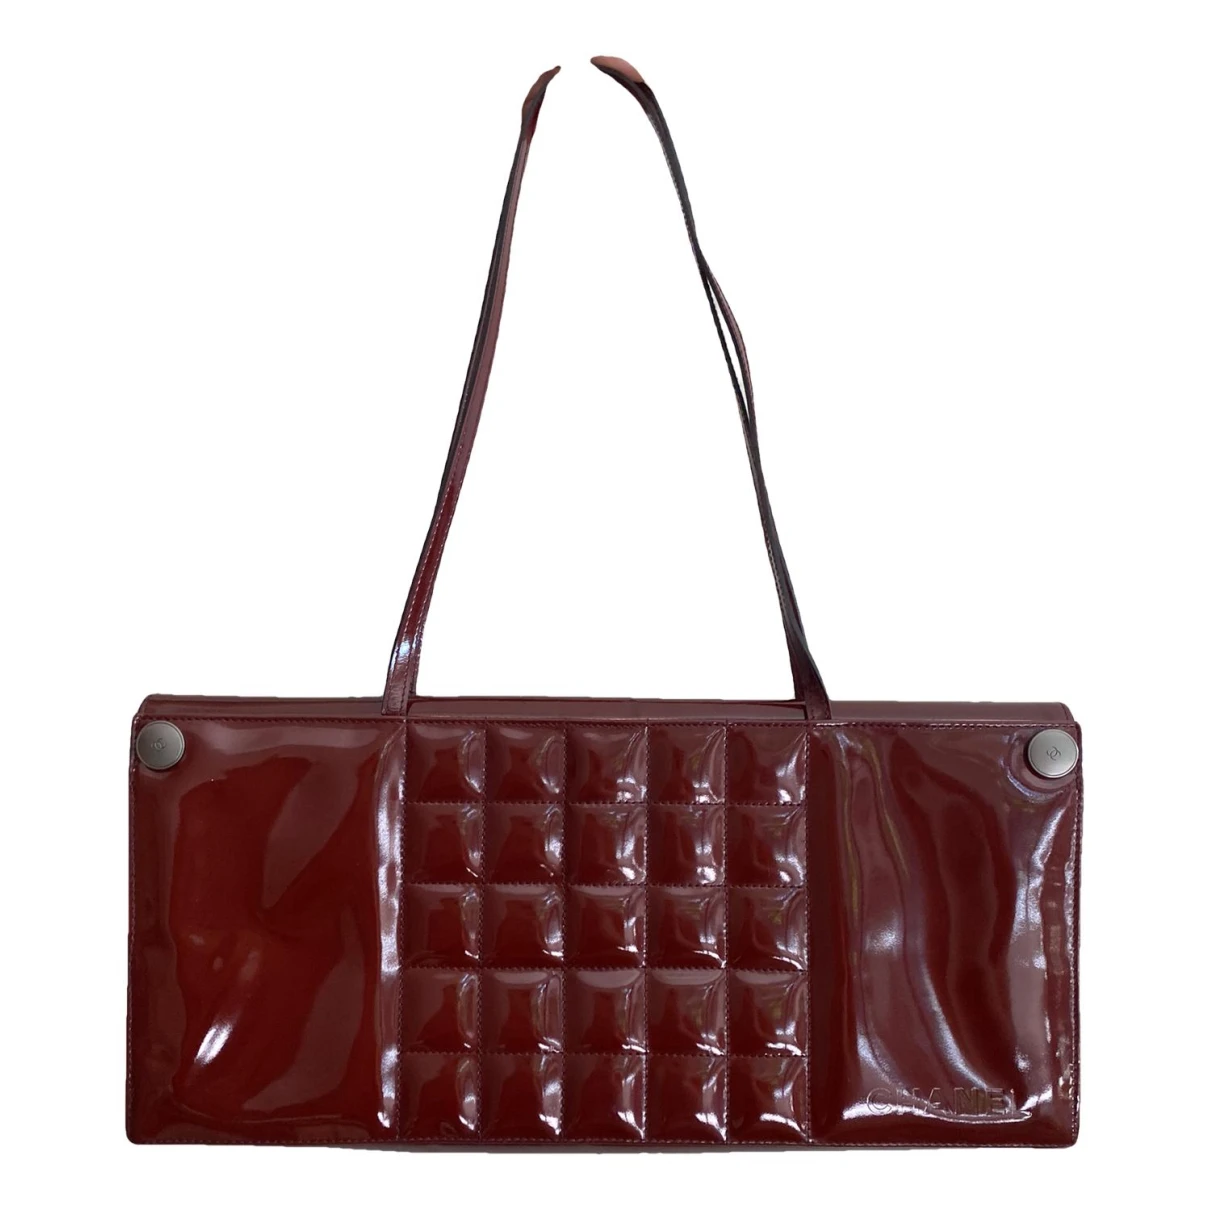 Pre-owned Chanel East West Chocolate Bar Patent Leather Handbag In Burgundy